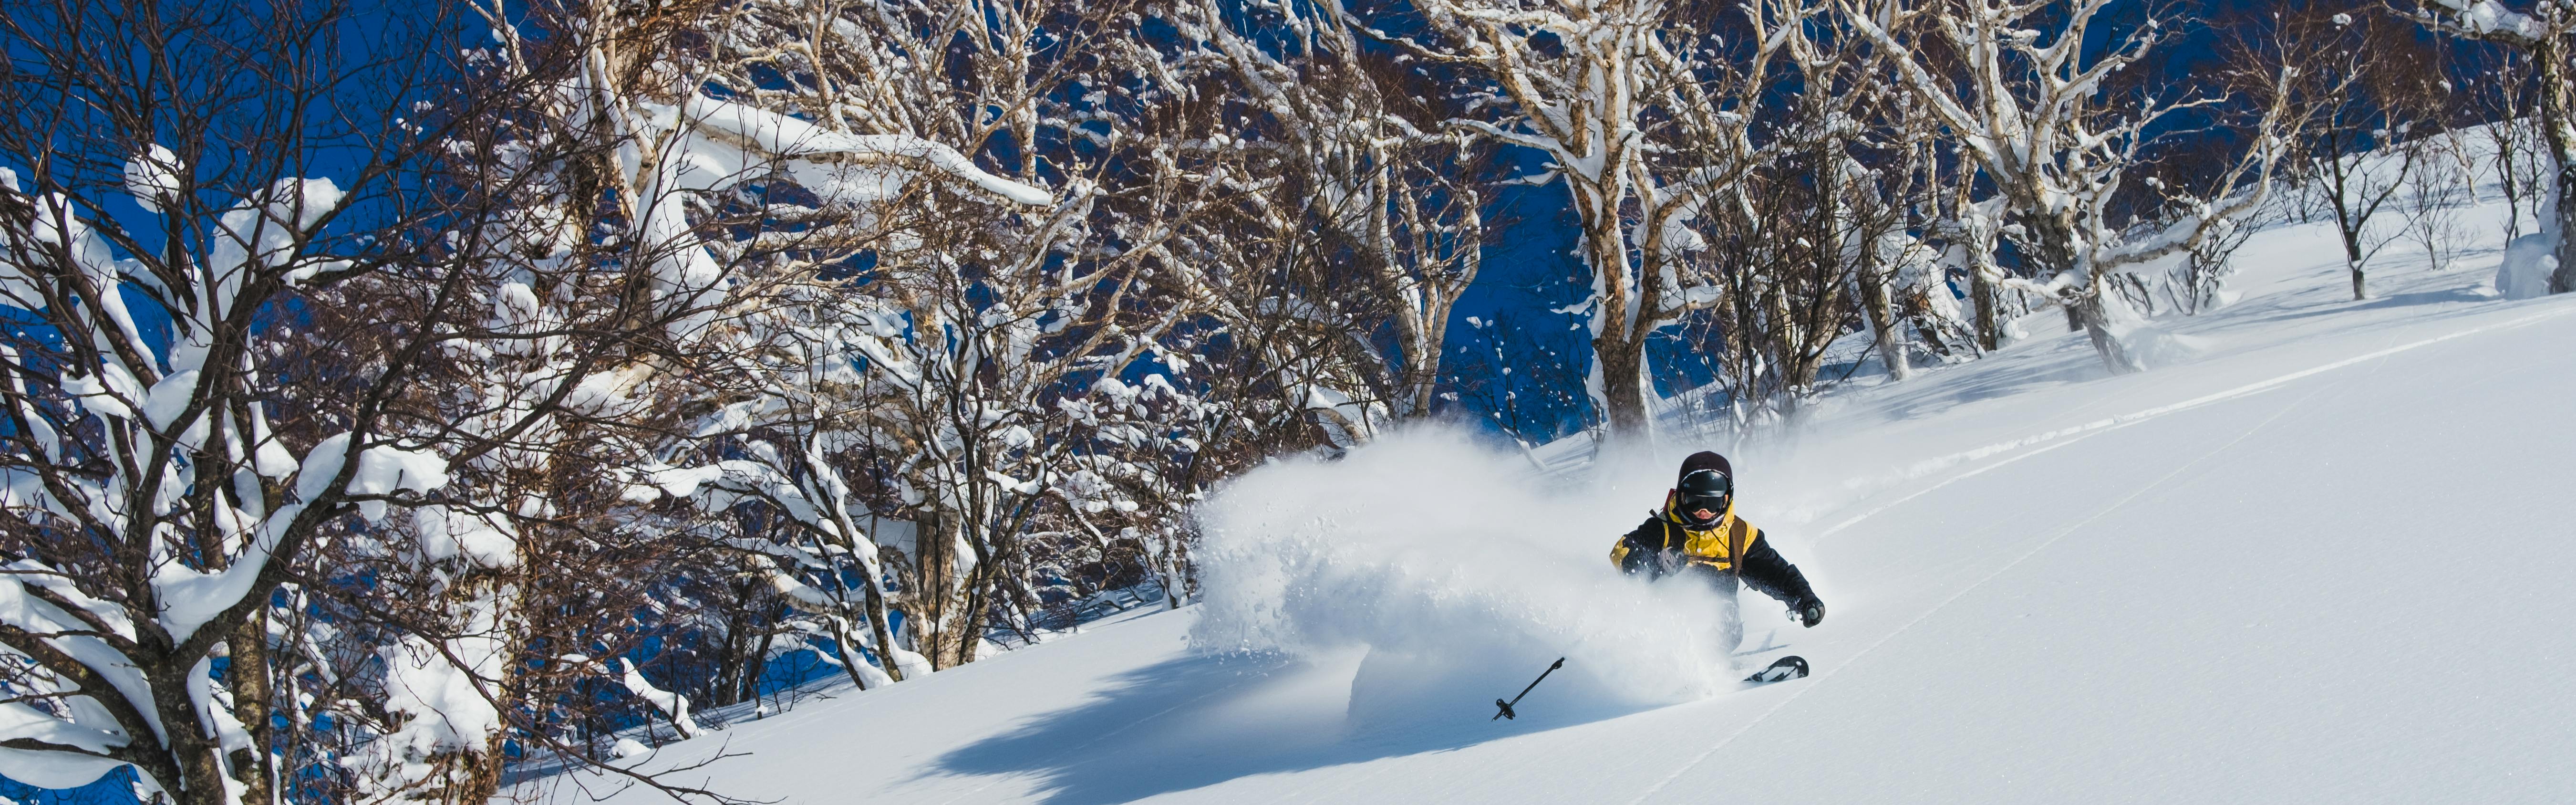 Why Some Skiers Don't Like Powder Skiing and How to Make Sure You Don't  Wind Up That Way